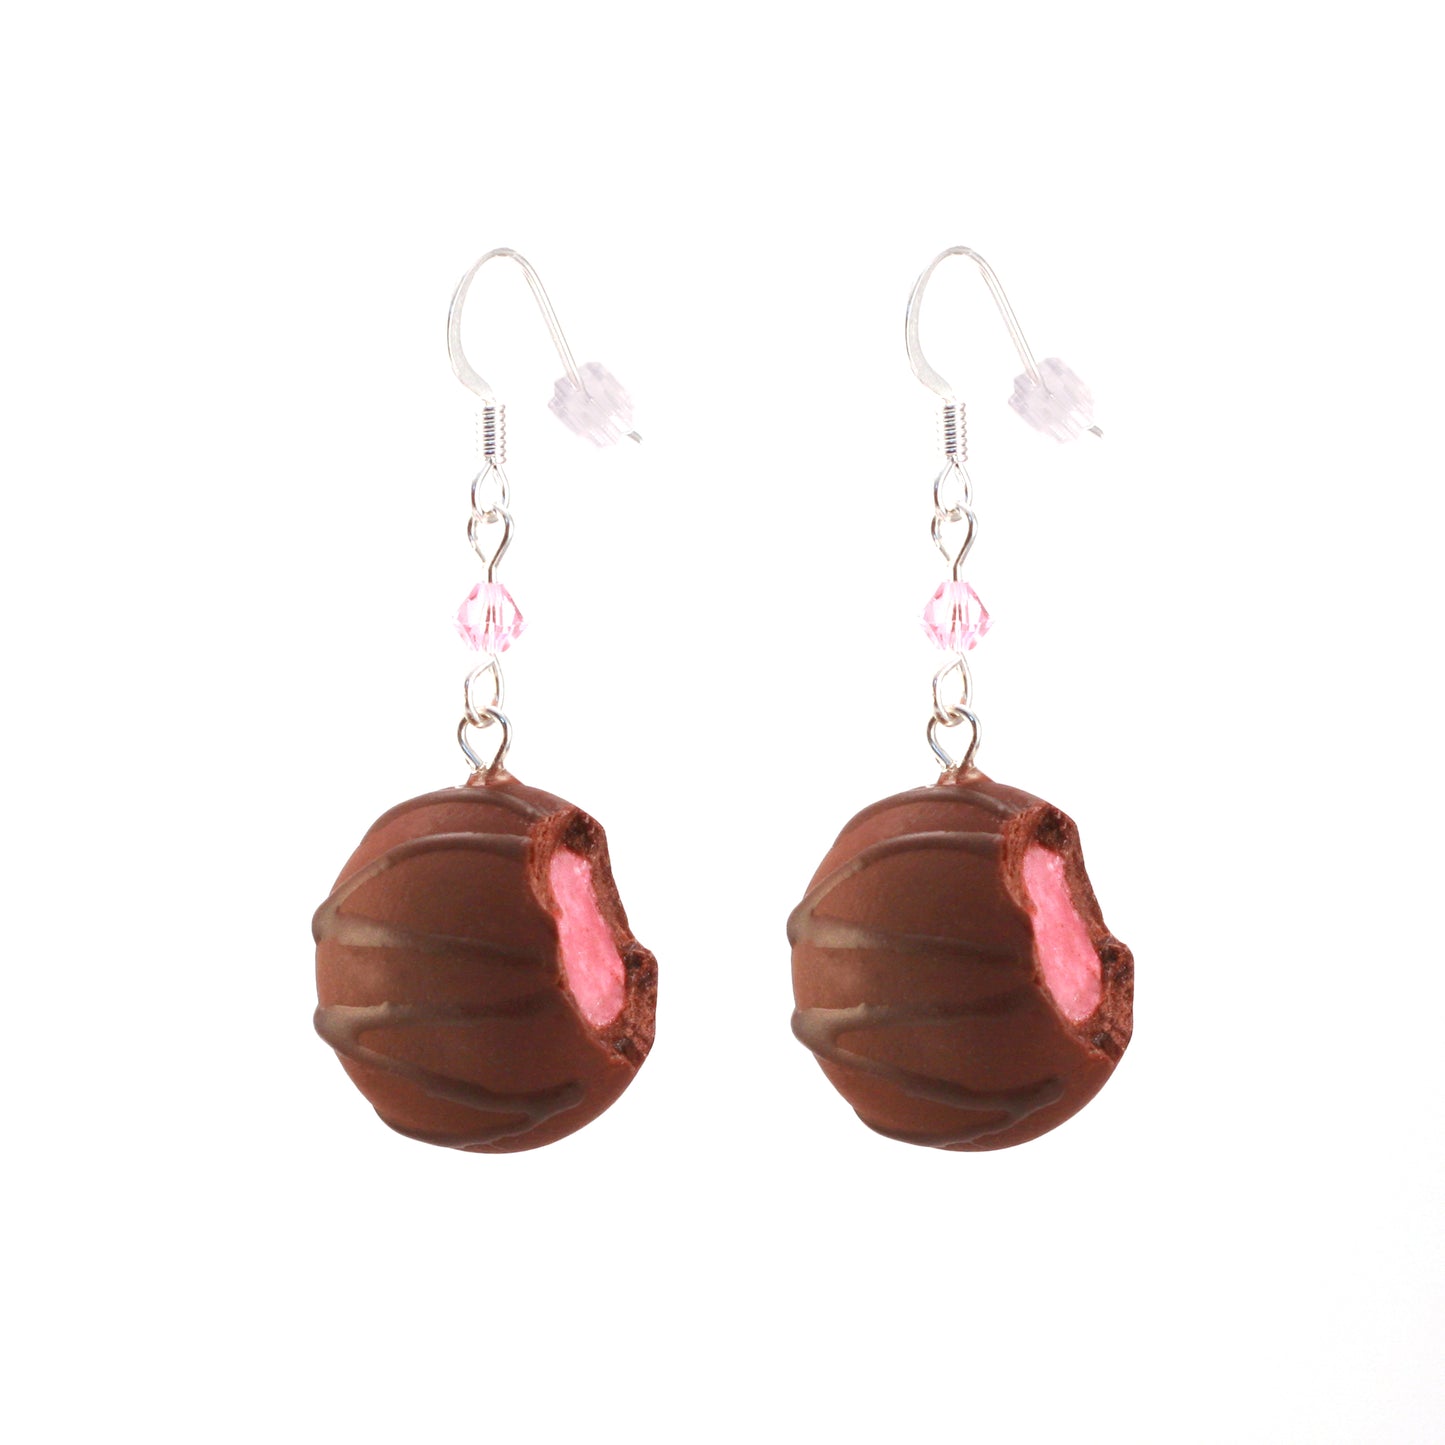 Create Your Own Scented Food Jewelry Earrings